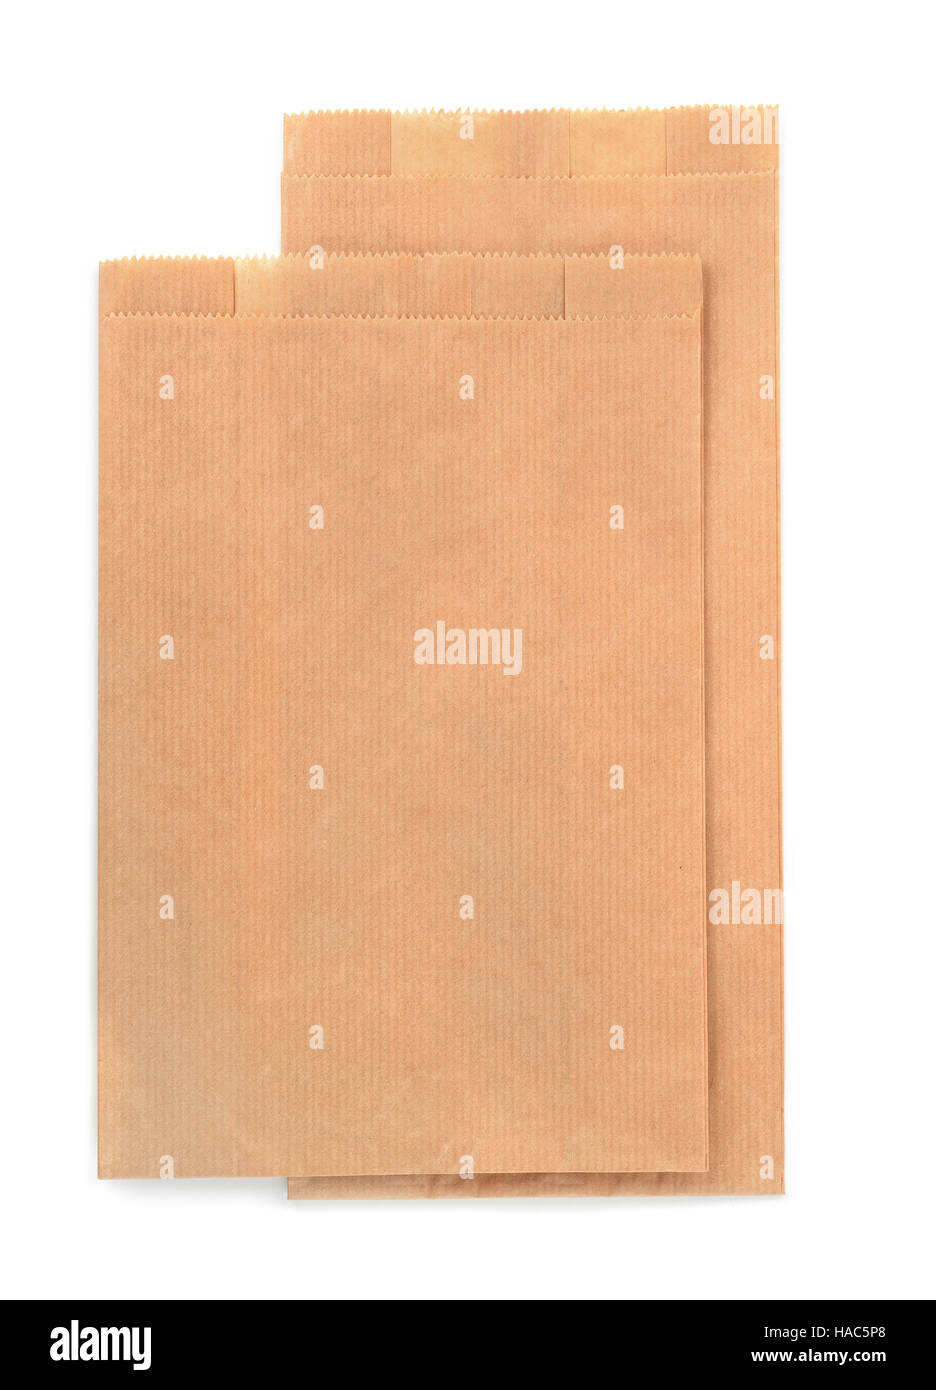 Folded brown kraft paper bags isolated on white Stock Photo